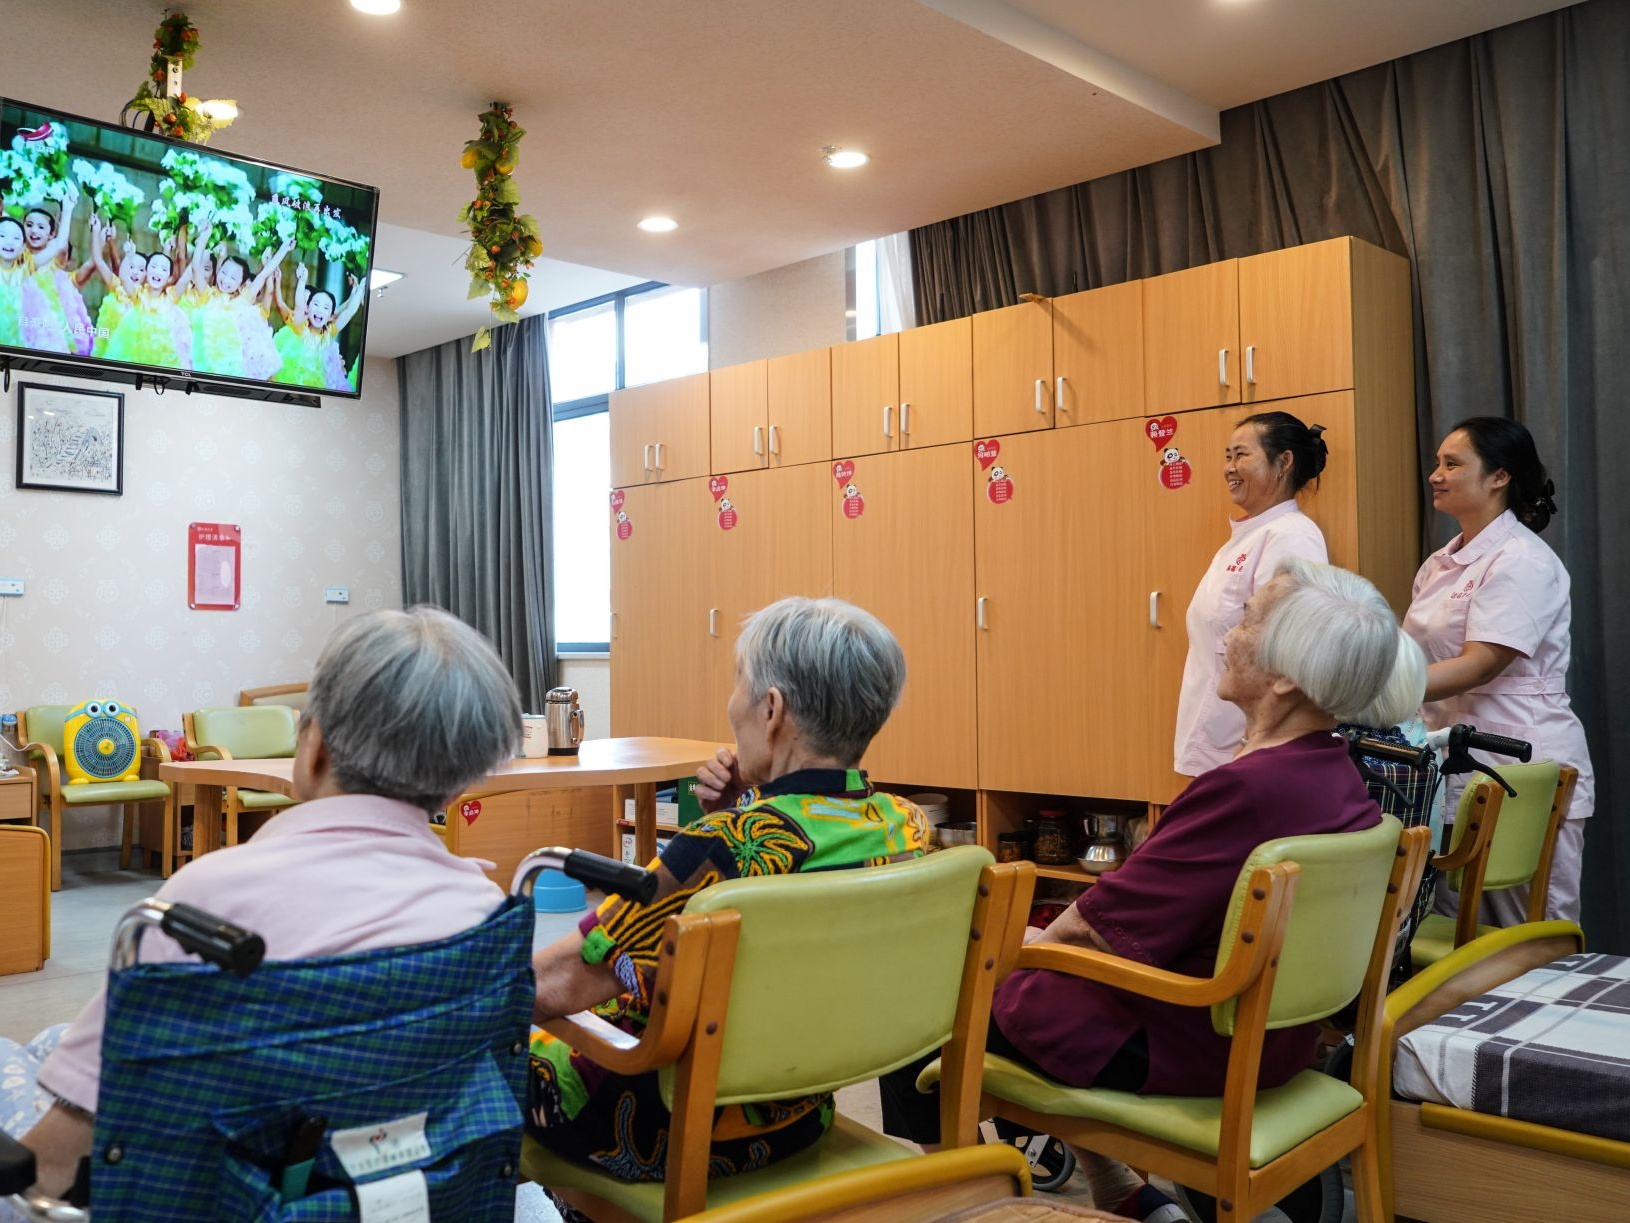 Elderly care service companies surge in China as aging population increases